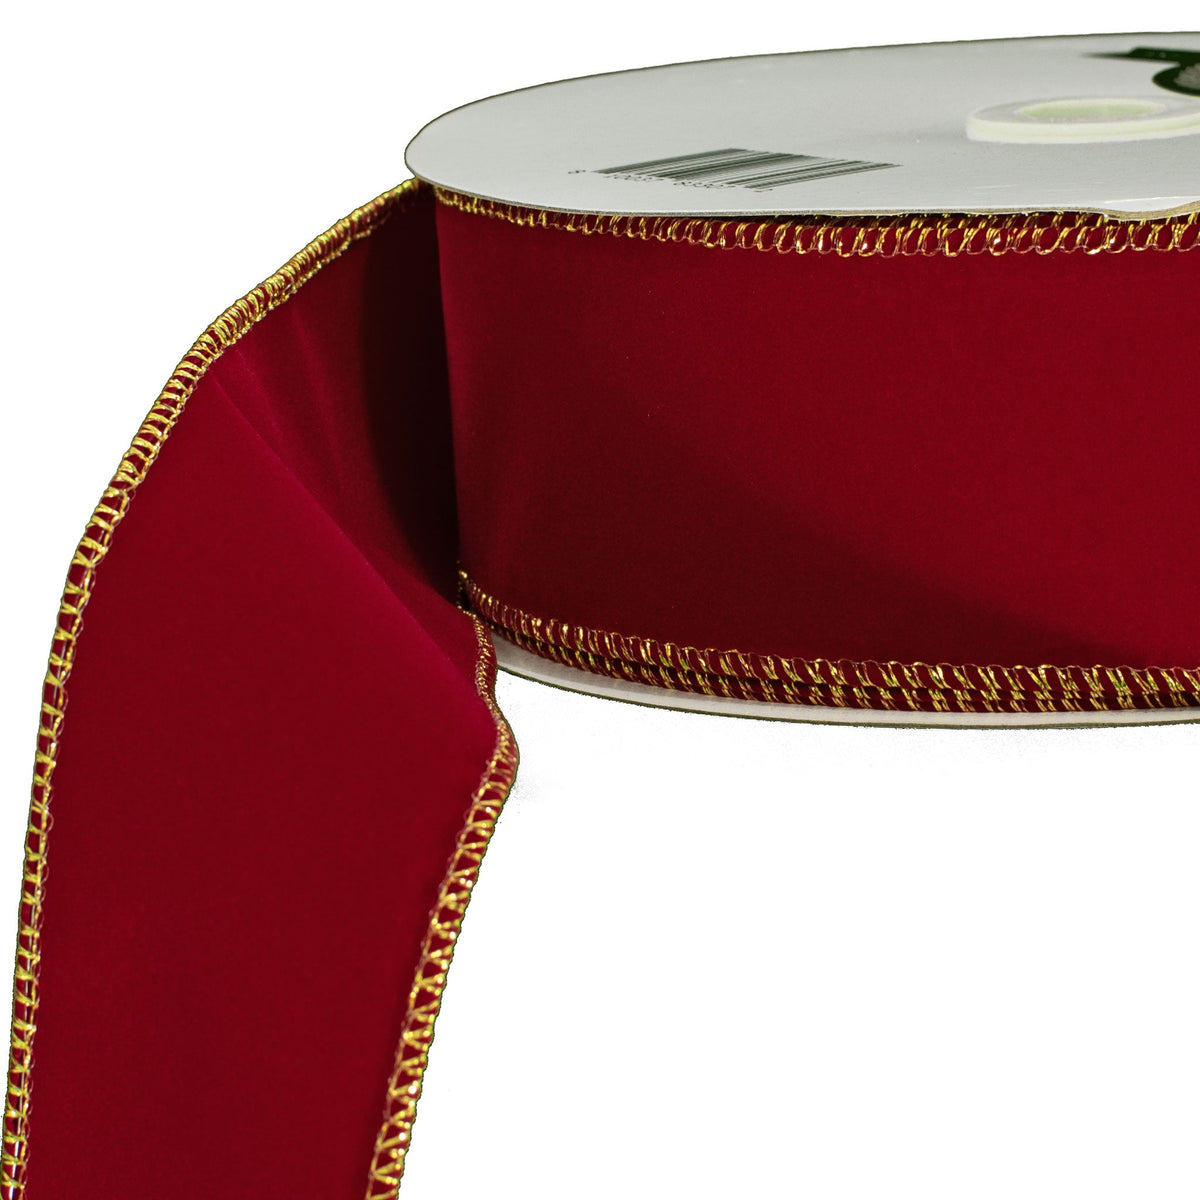 Lee Display's double-sided red velvet ribbon comes with a gold wire edge.